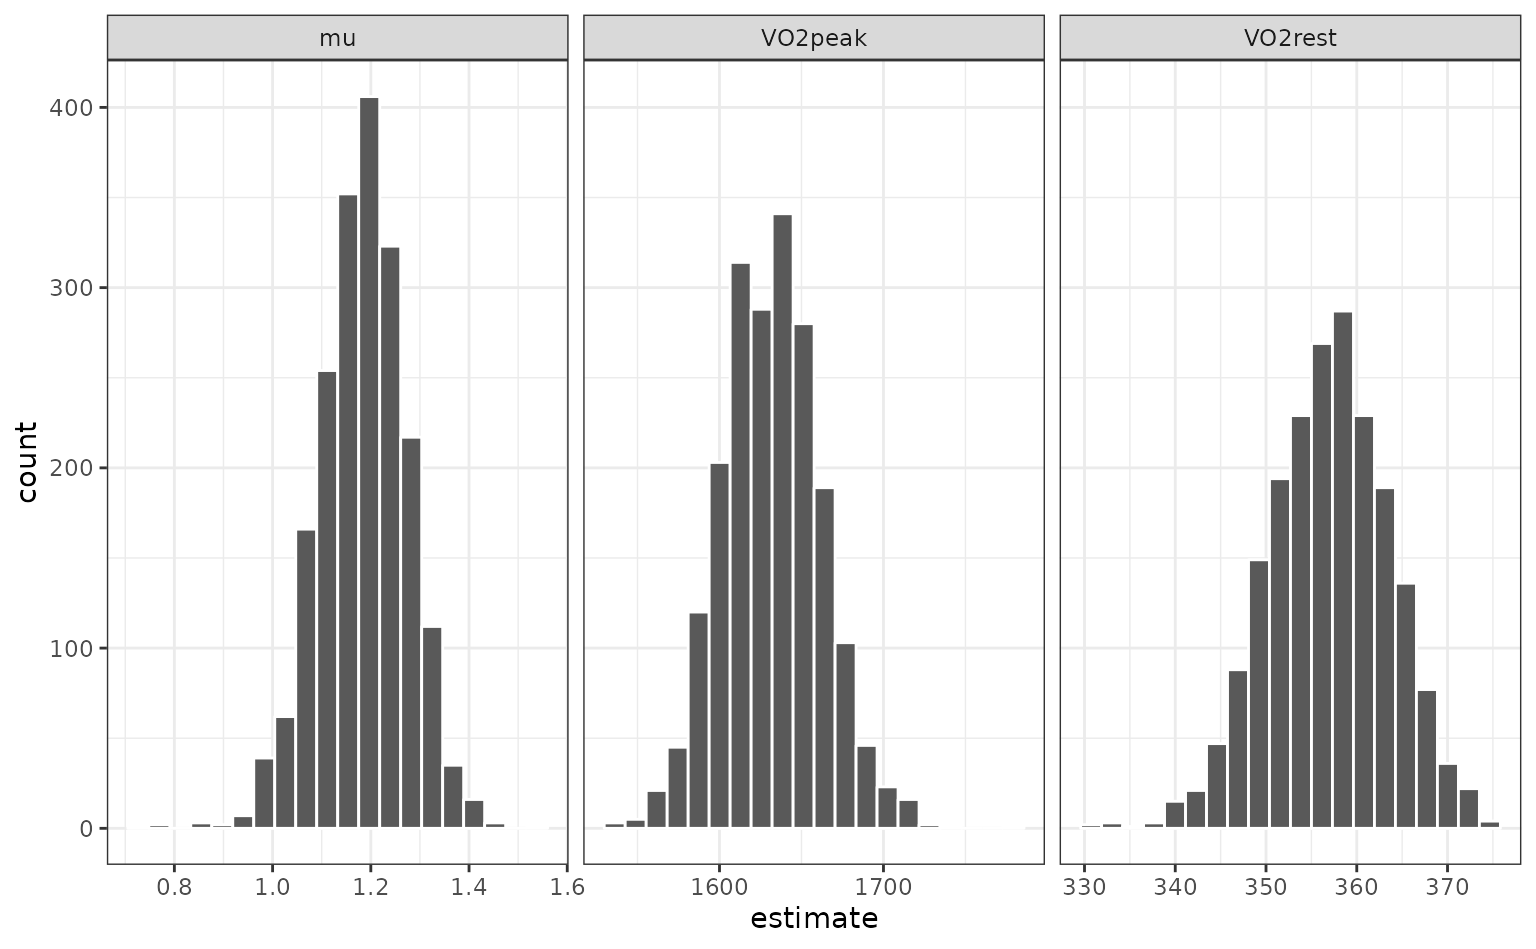 Three histograms for mu, VO2peak, and VO2rest: all distributions are unimodal and symmetric.